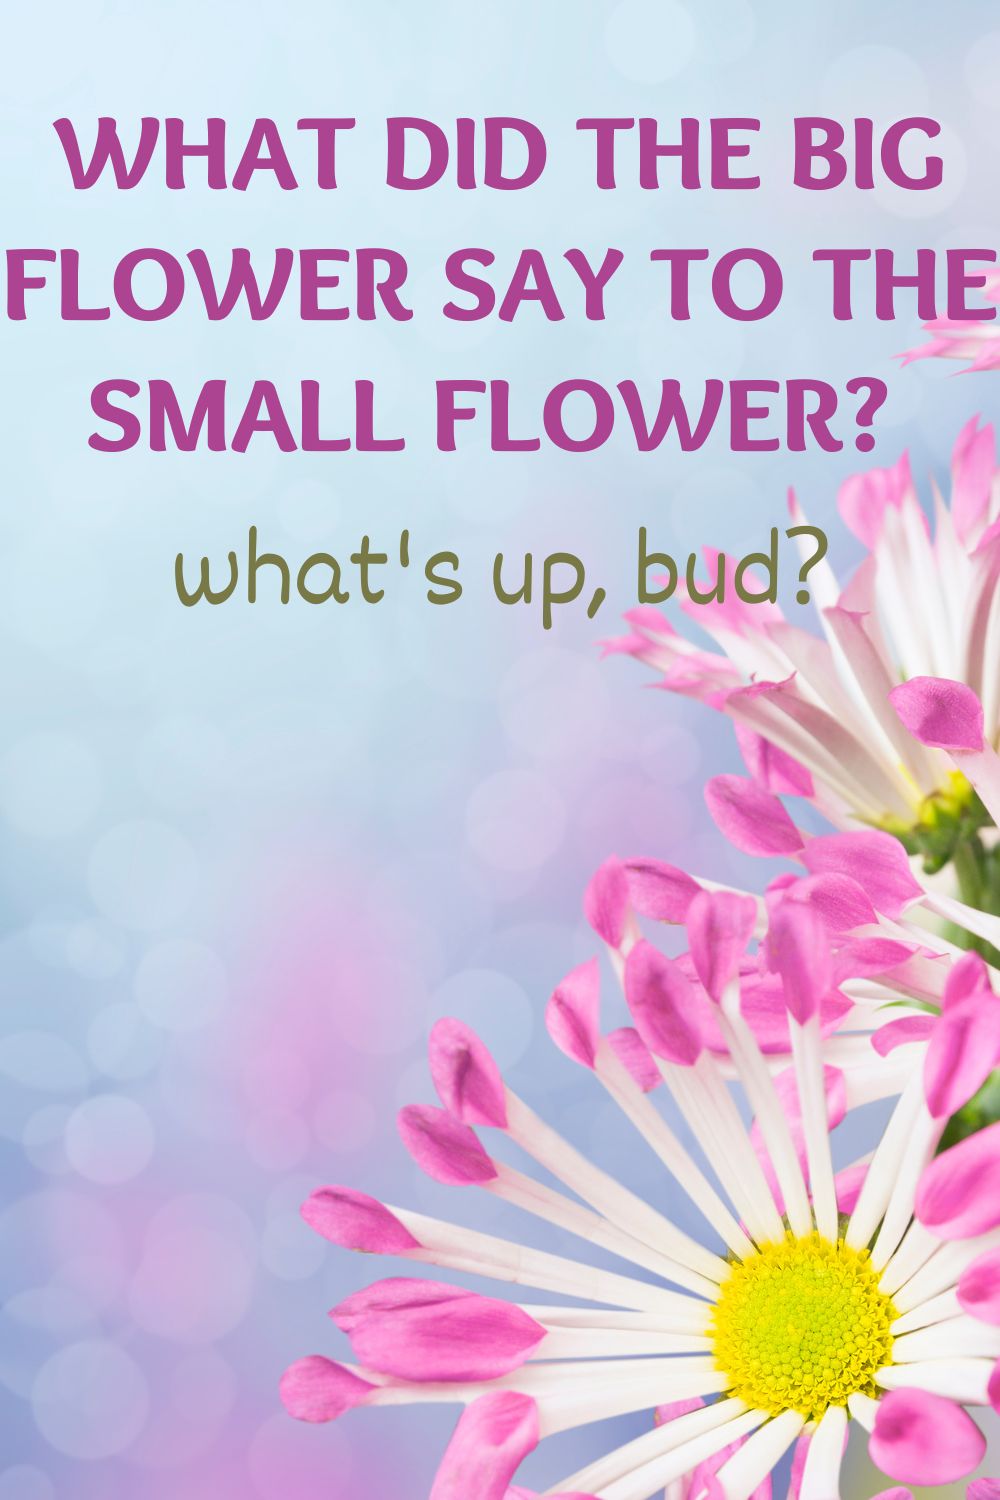 What did the big flower say to the small flower? What's up, bud? 